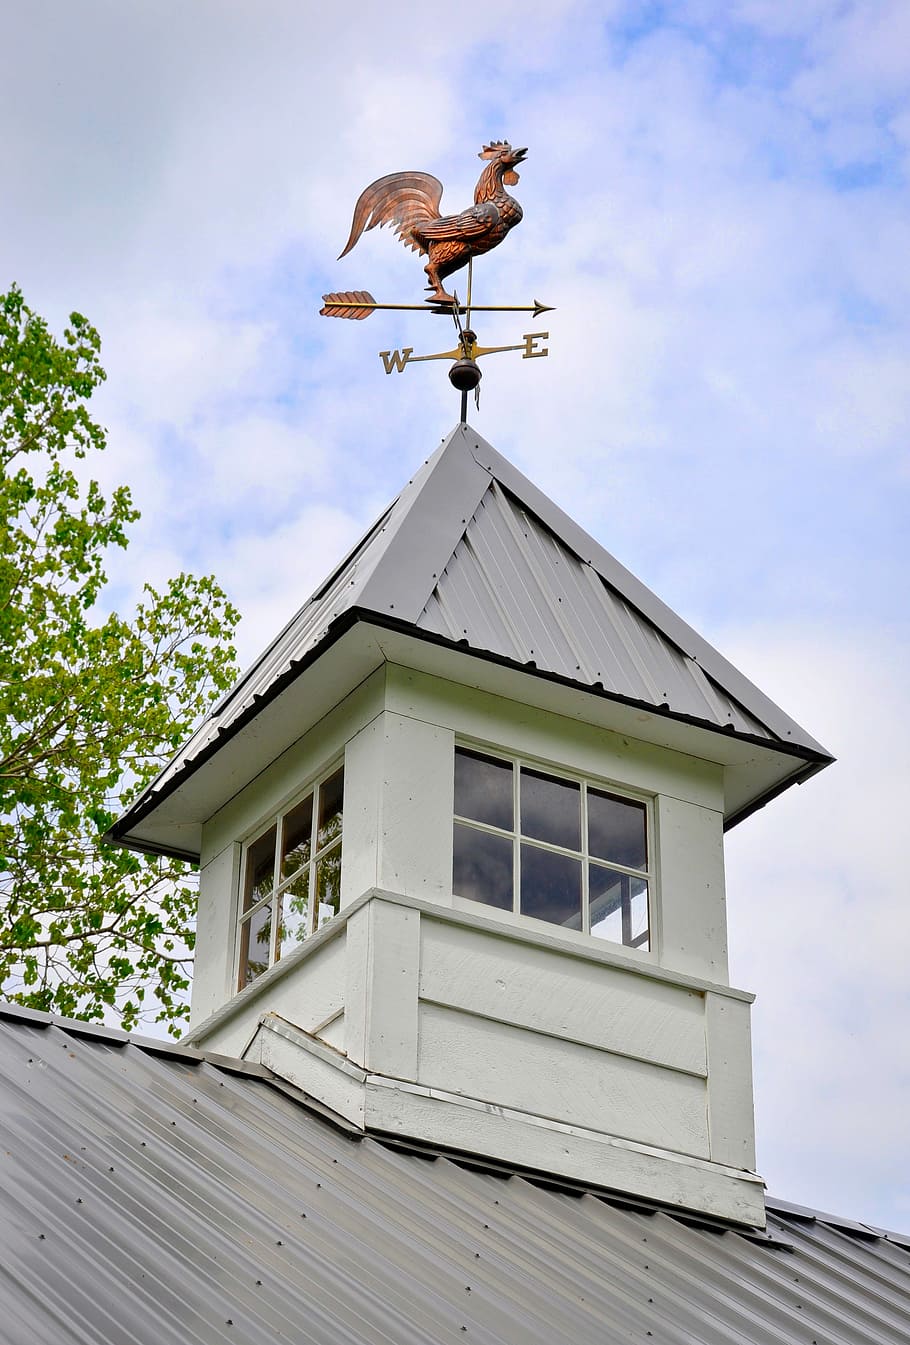 Weather Vane, Antique, Cupola, Farm, barn, rooster, cooper, HD wallpaper